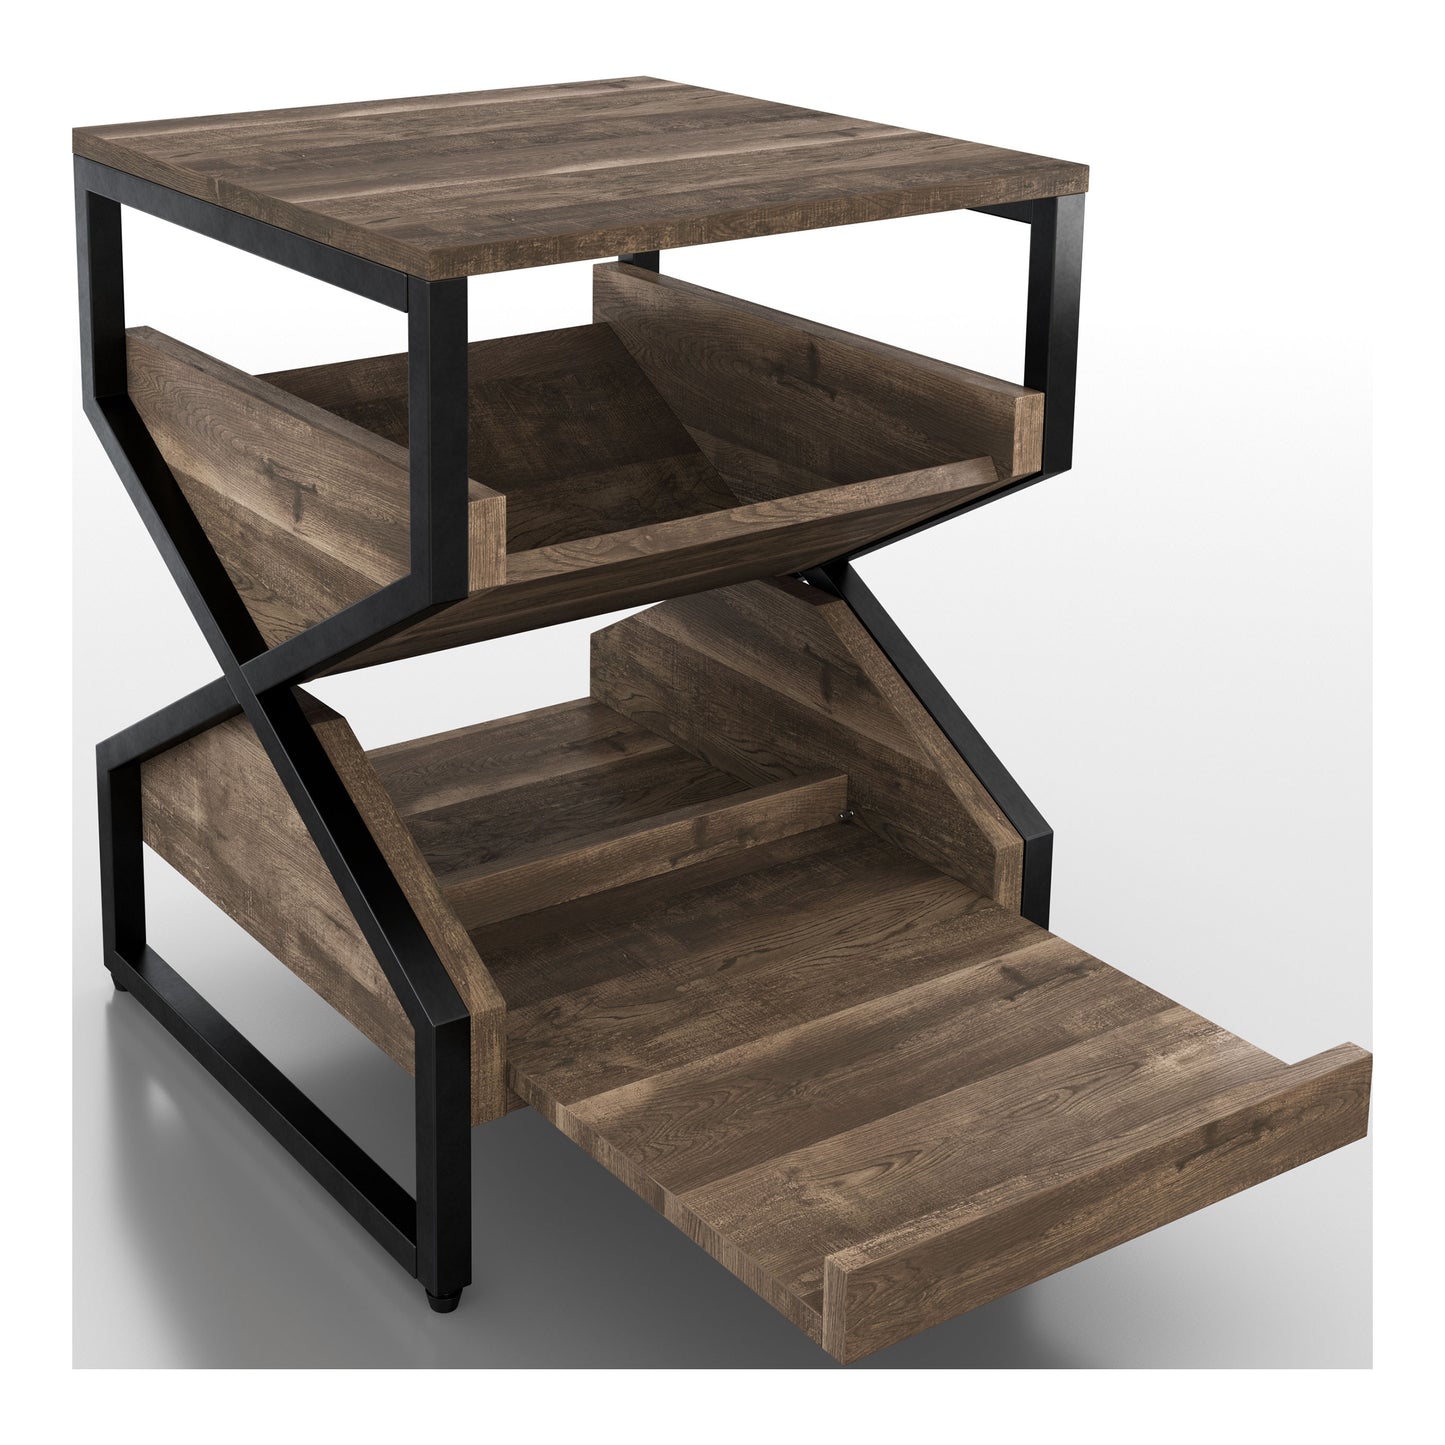 Right angled industrial reclaimed oak end table with a pull-out tray shelf extended on a white background